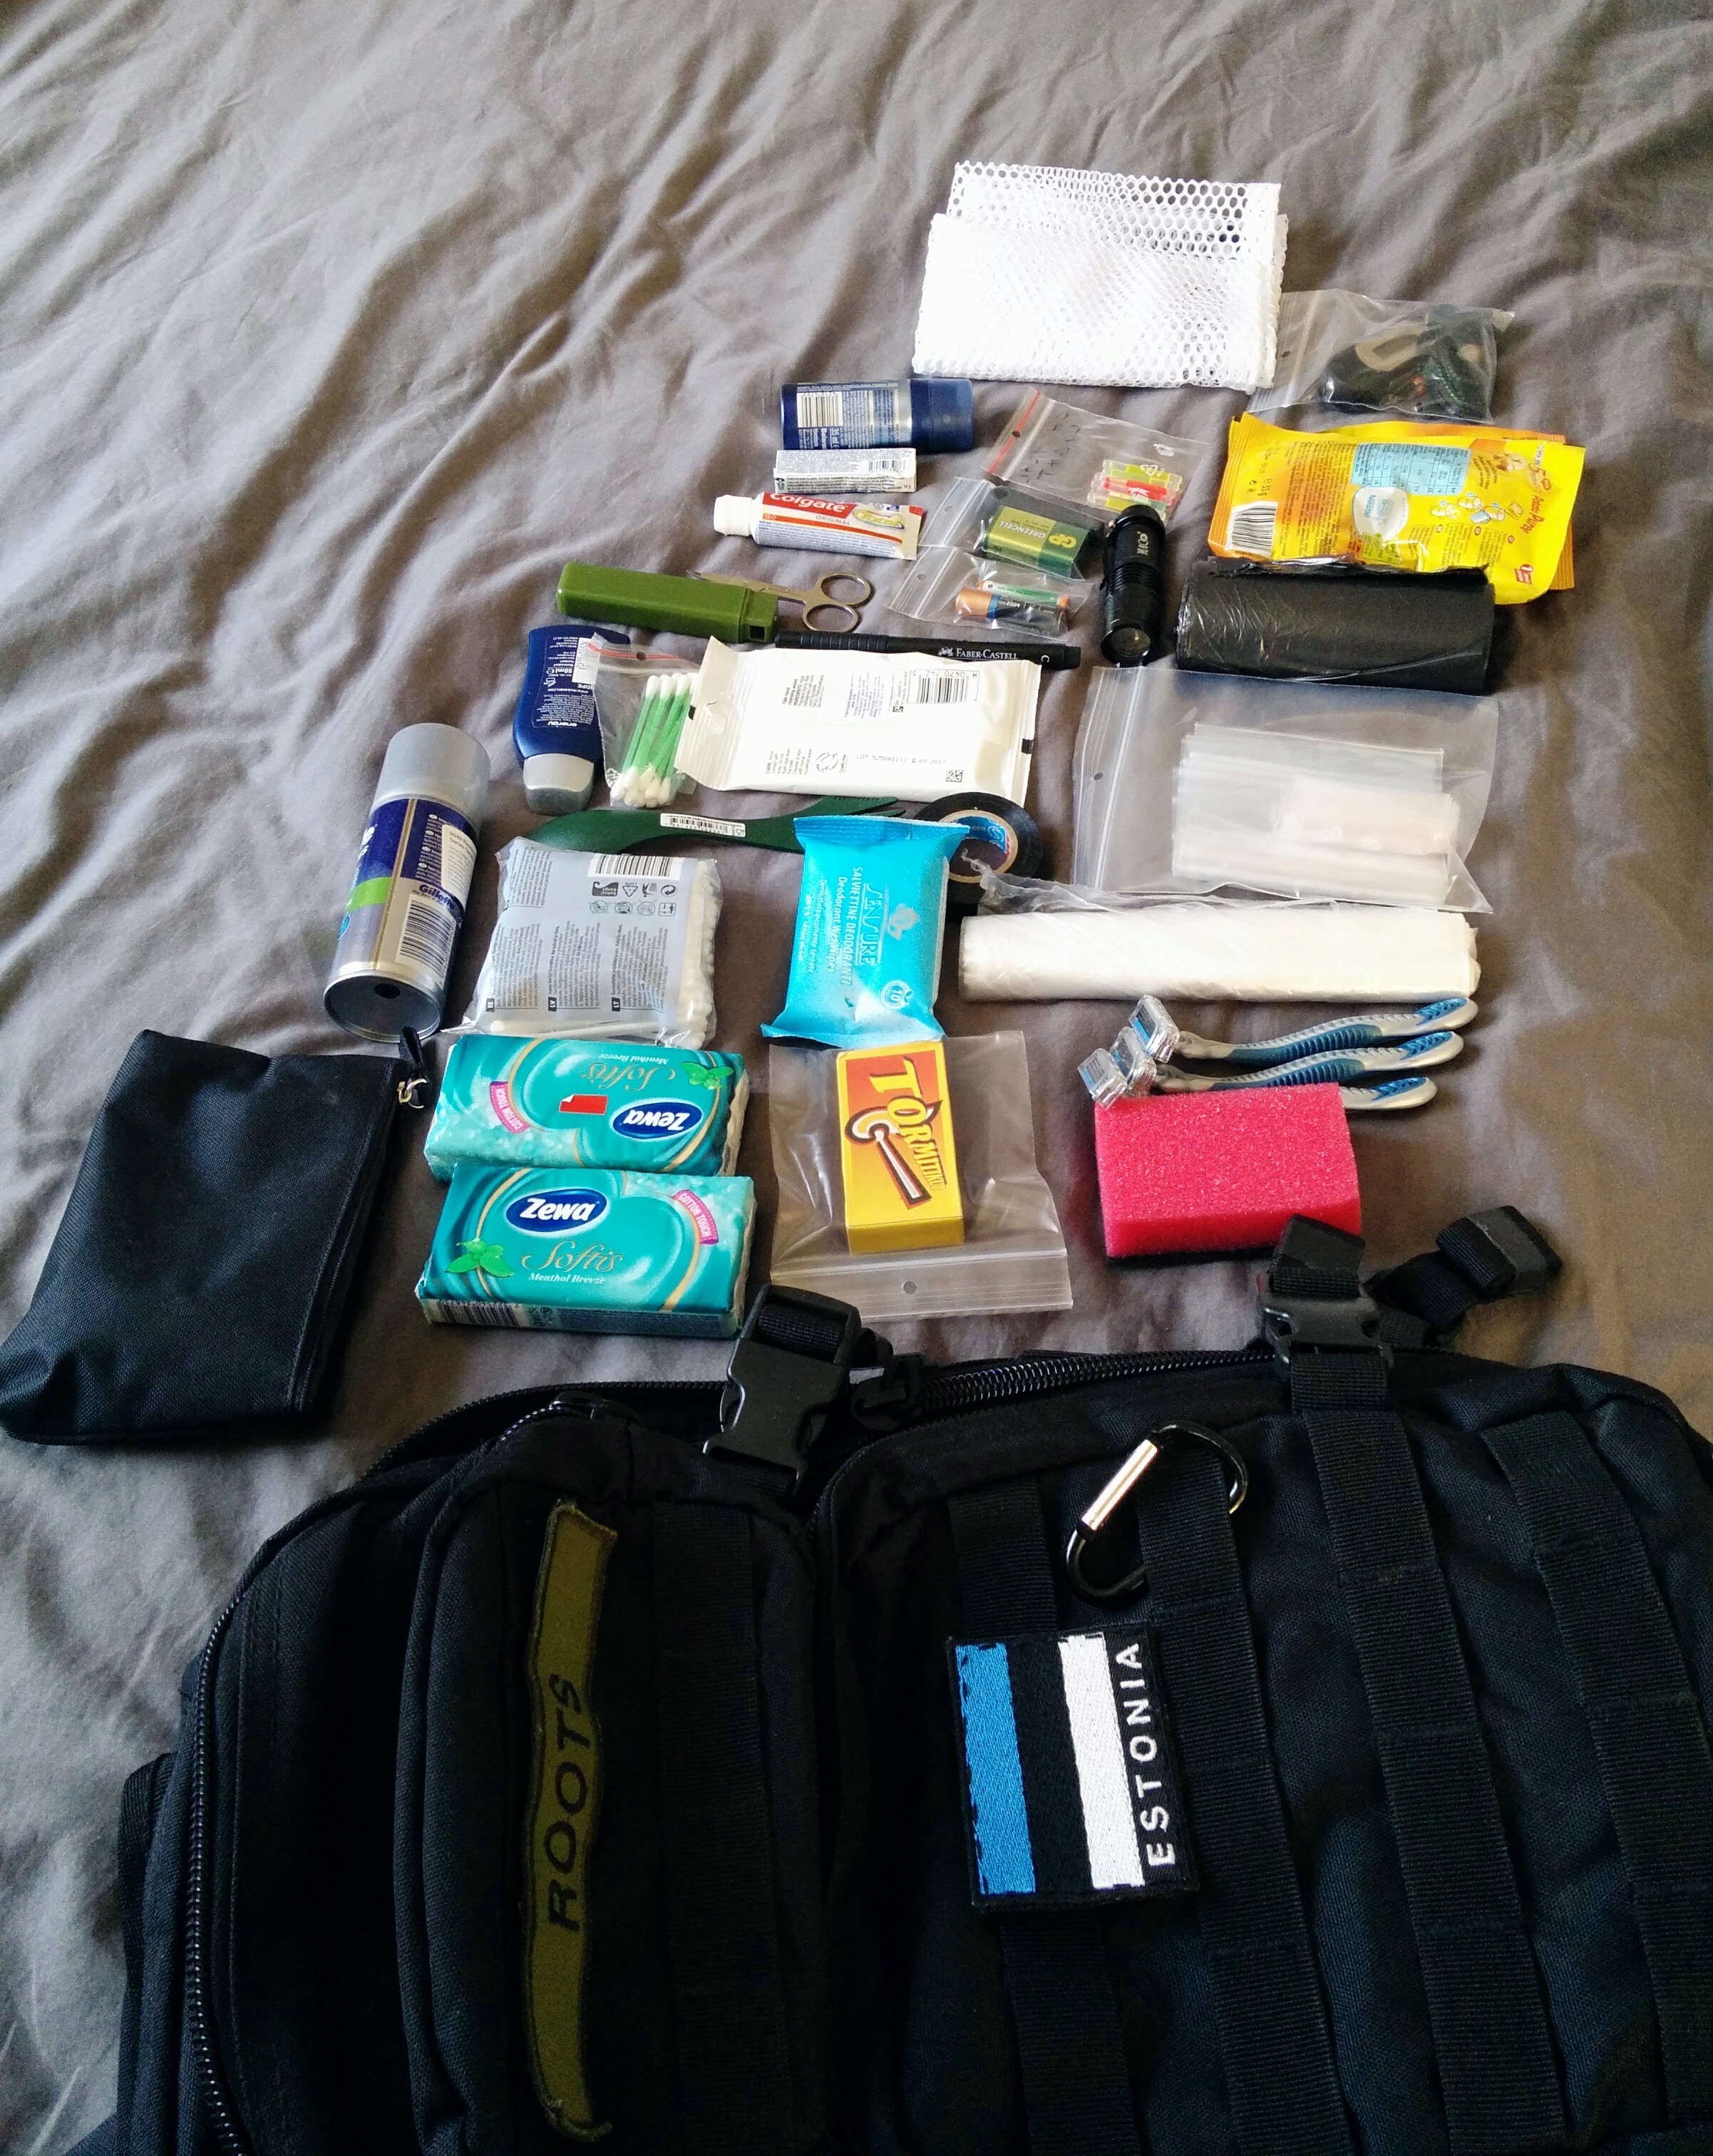 Items included in the bag